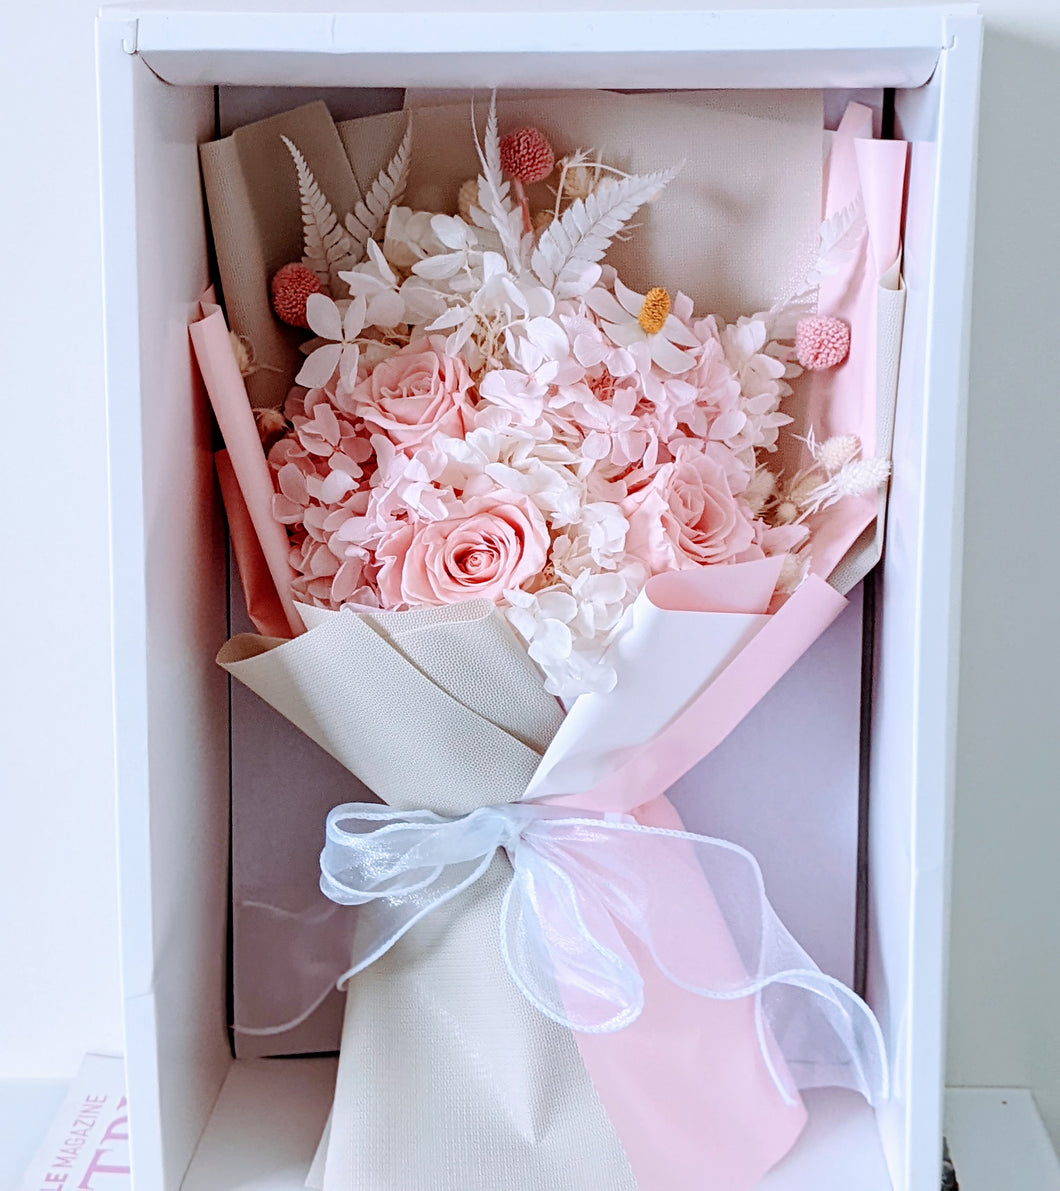 Beverley - Everlasting Dried Arrangement with Pink Roses & Hydrangea in Box Bag